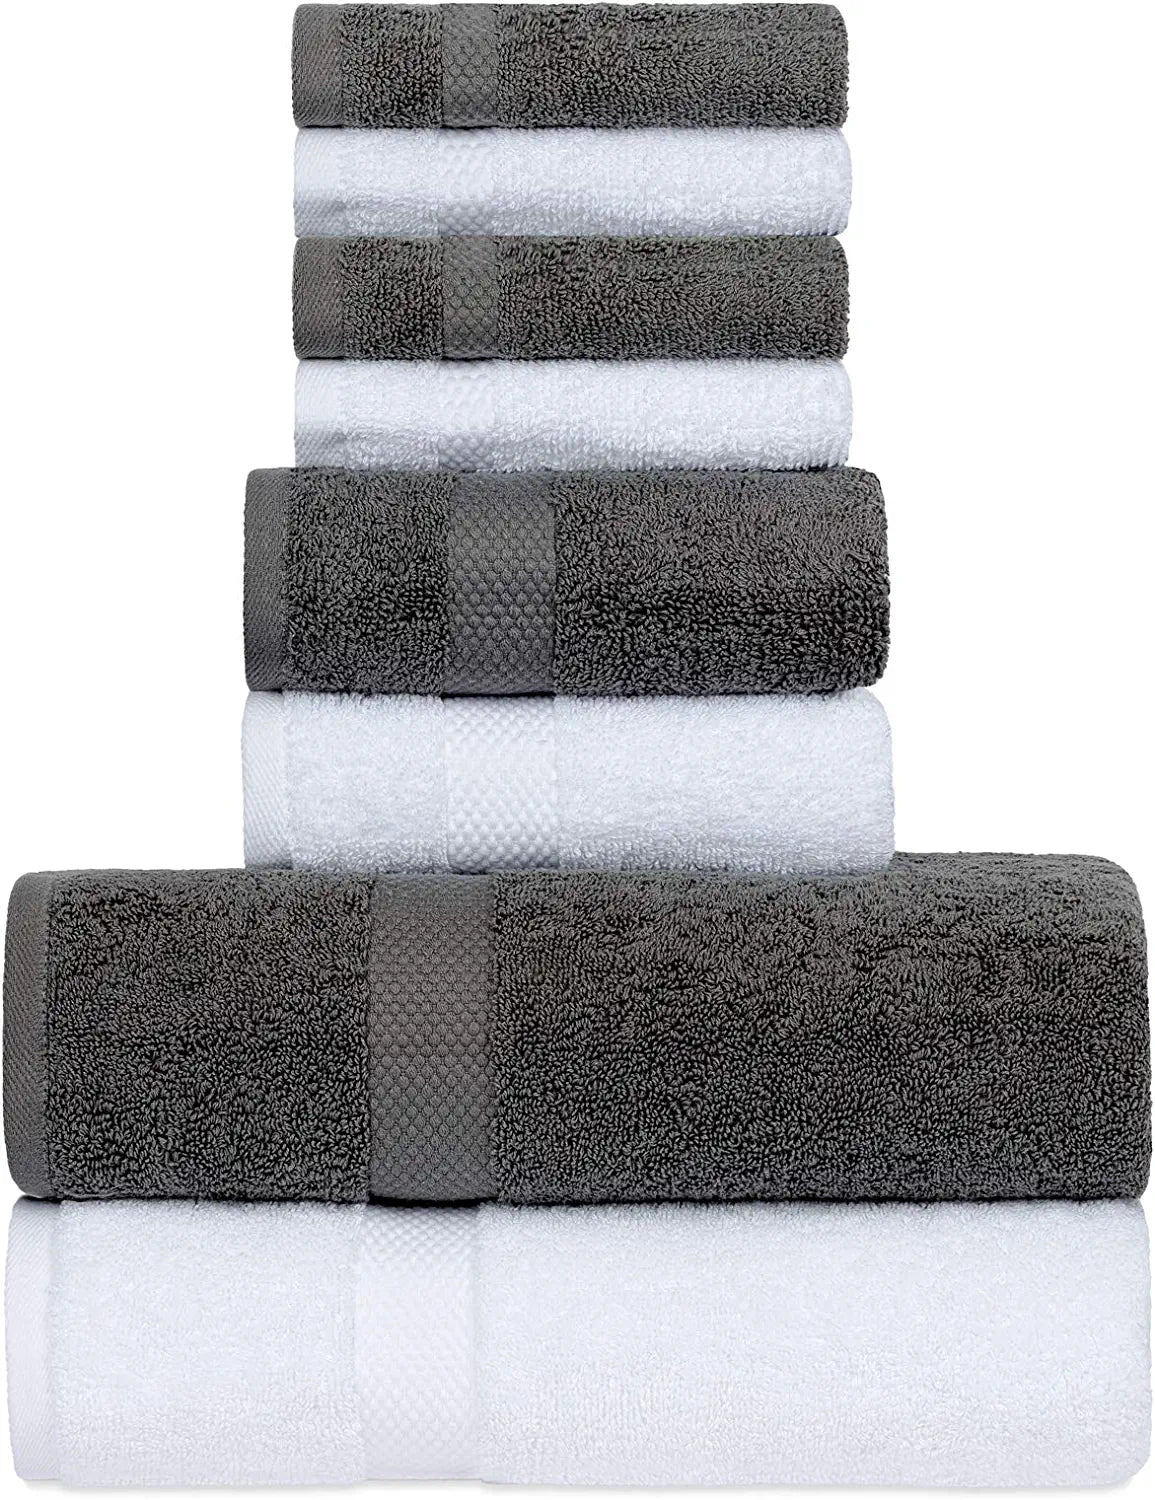 8Pc Grey and White Towel Set